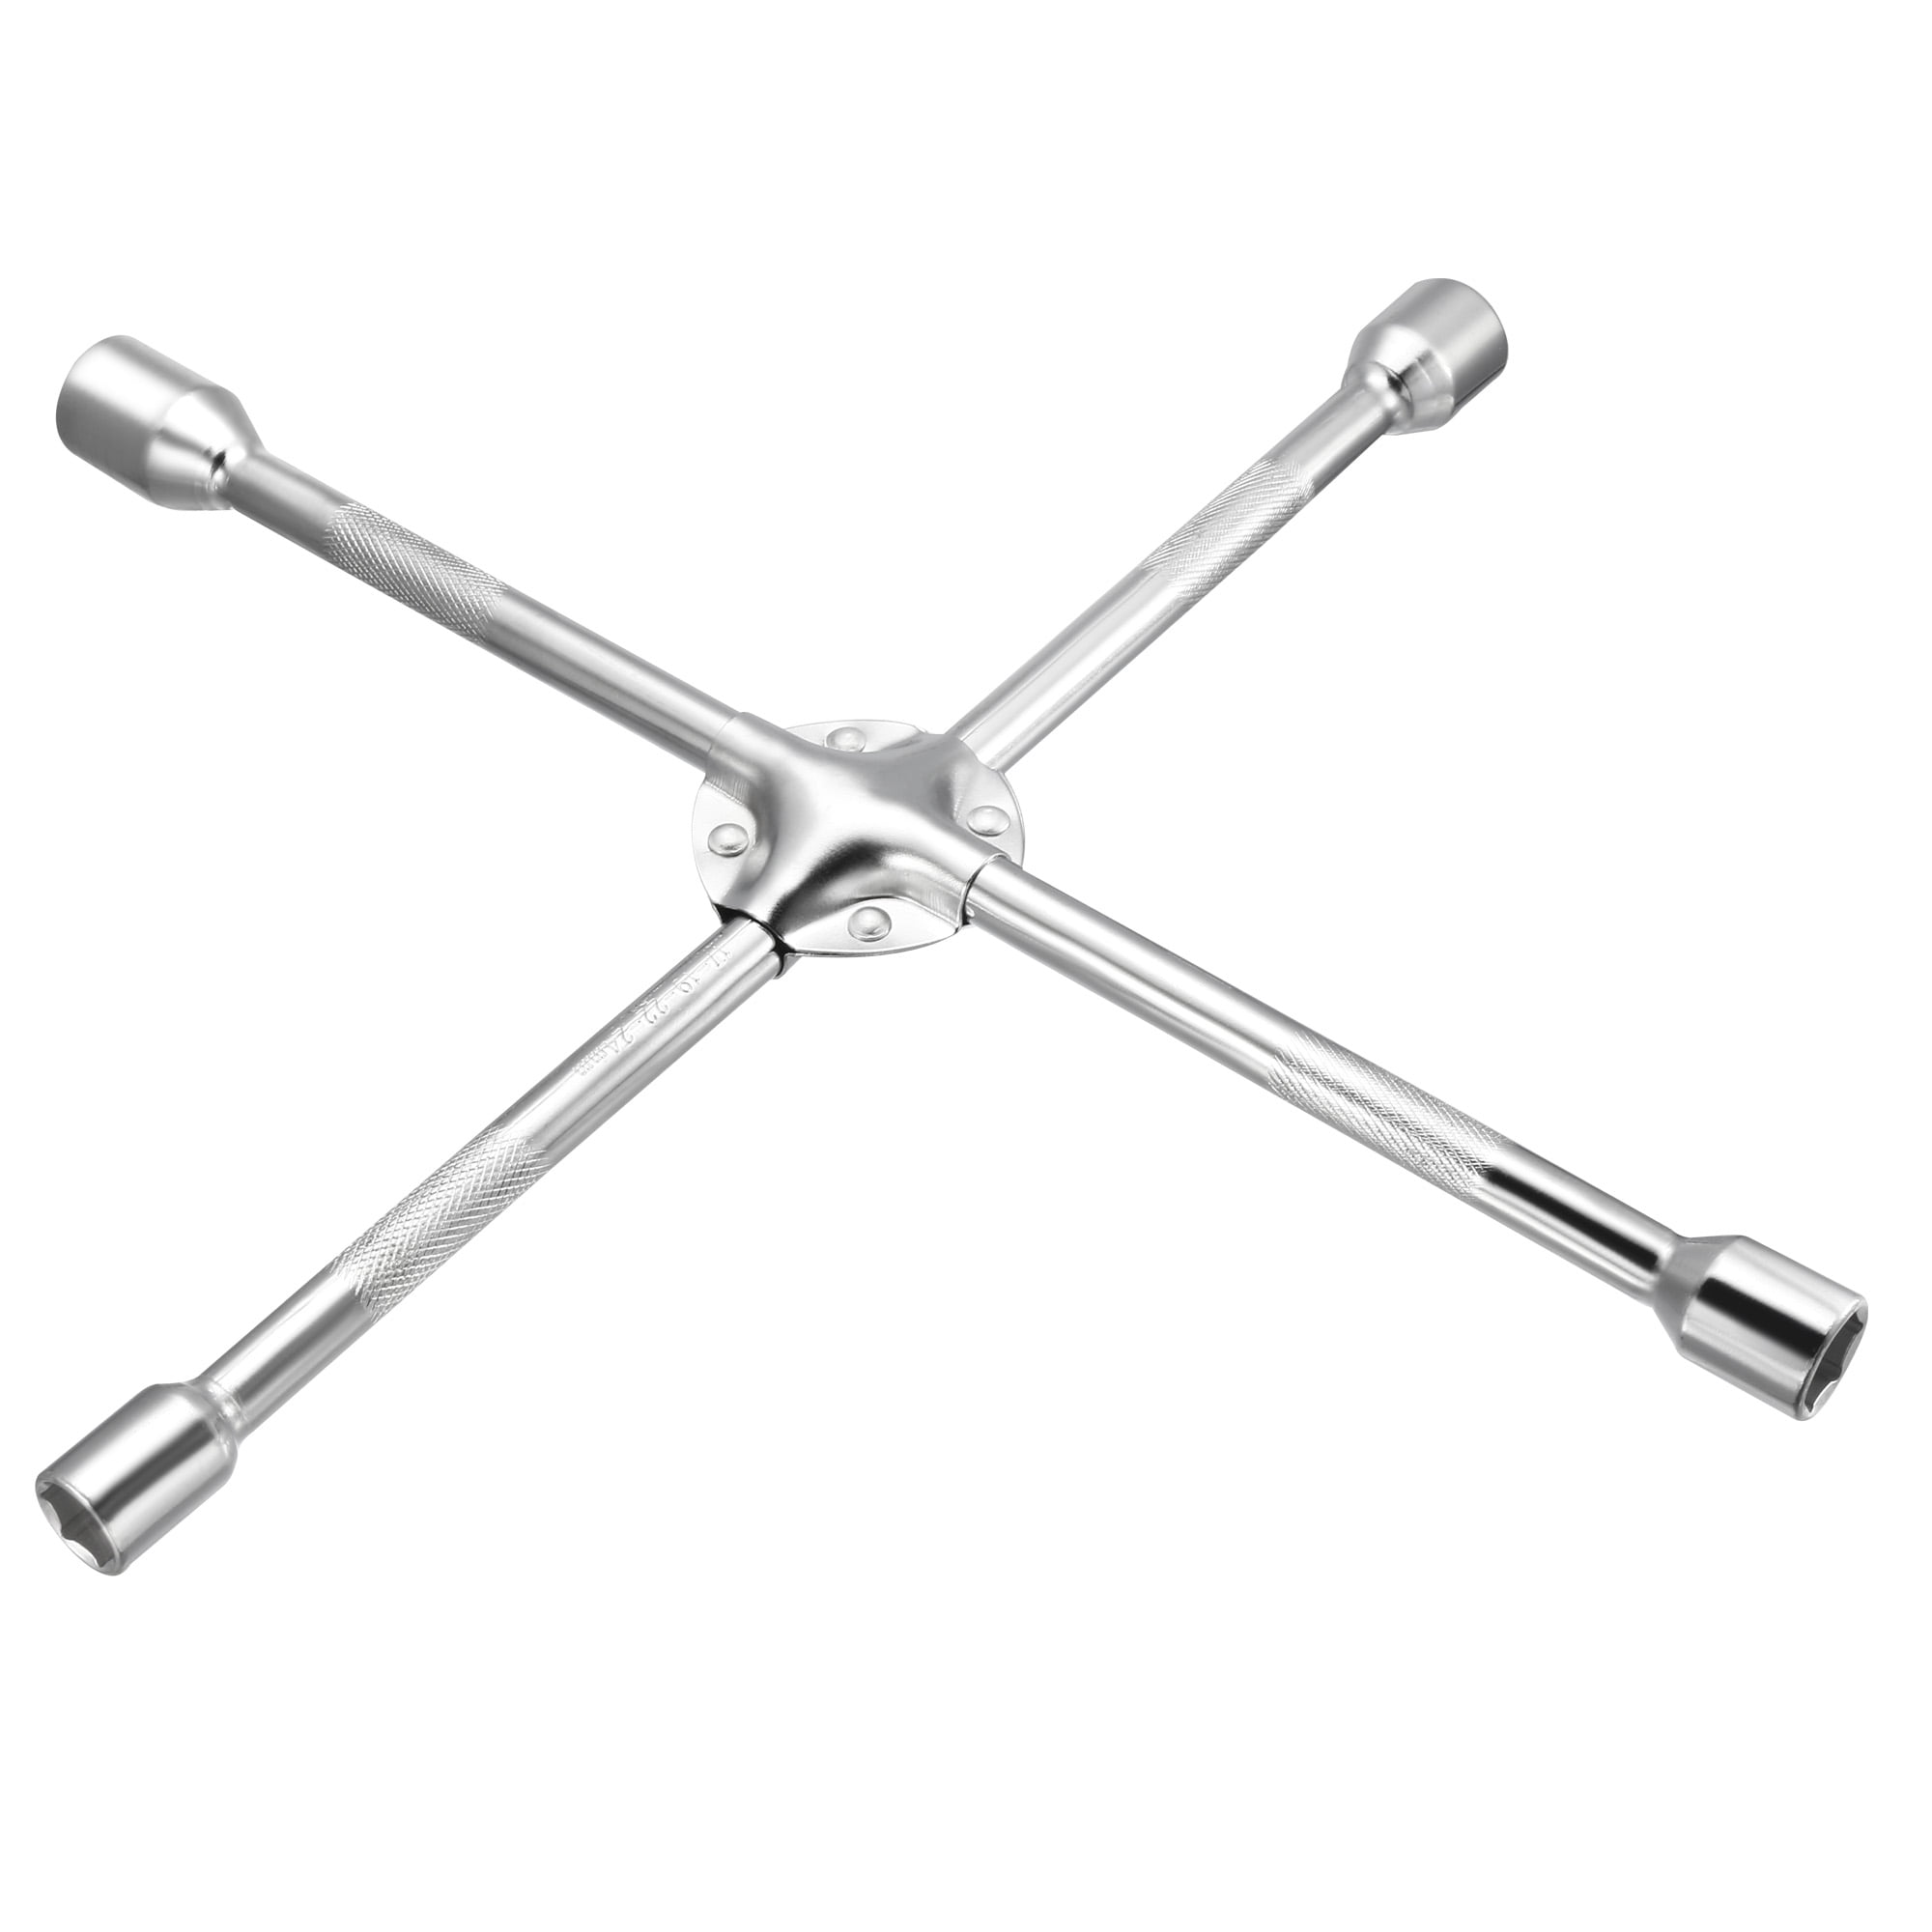 uxcell Lug Wrench 18-inch Universal 4-Way Cross Spanner with 17mm 19mm 22mm 24mm Standard Sockets for Car Tire Repair 